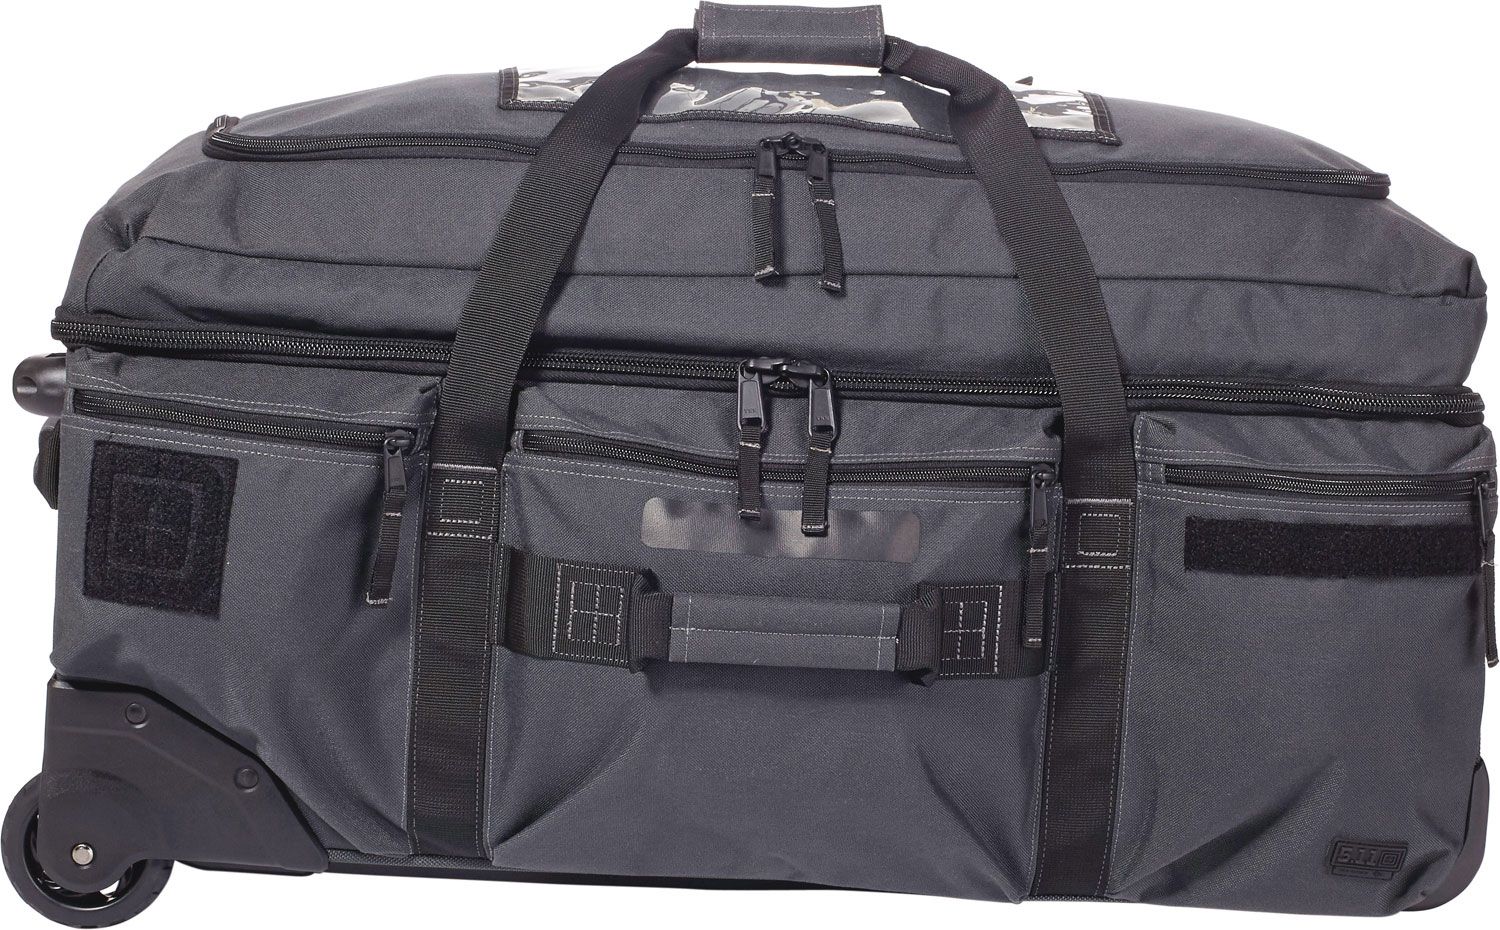 5.11 Tactical Mission Ready 2.0 Rolling Duffel Bag, Black (56960